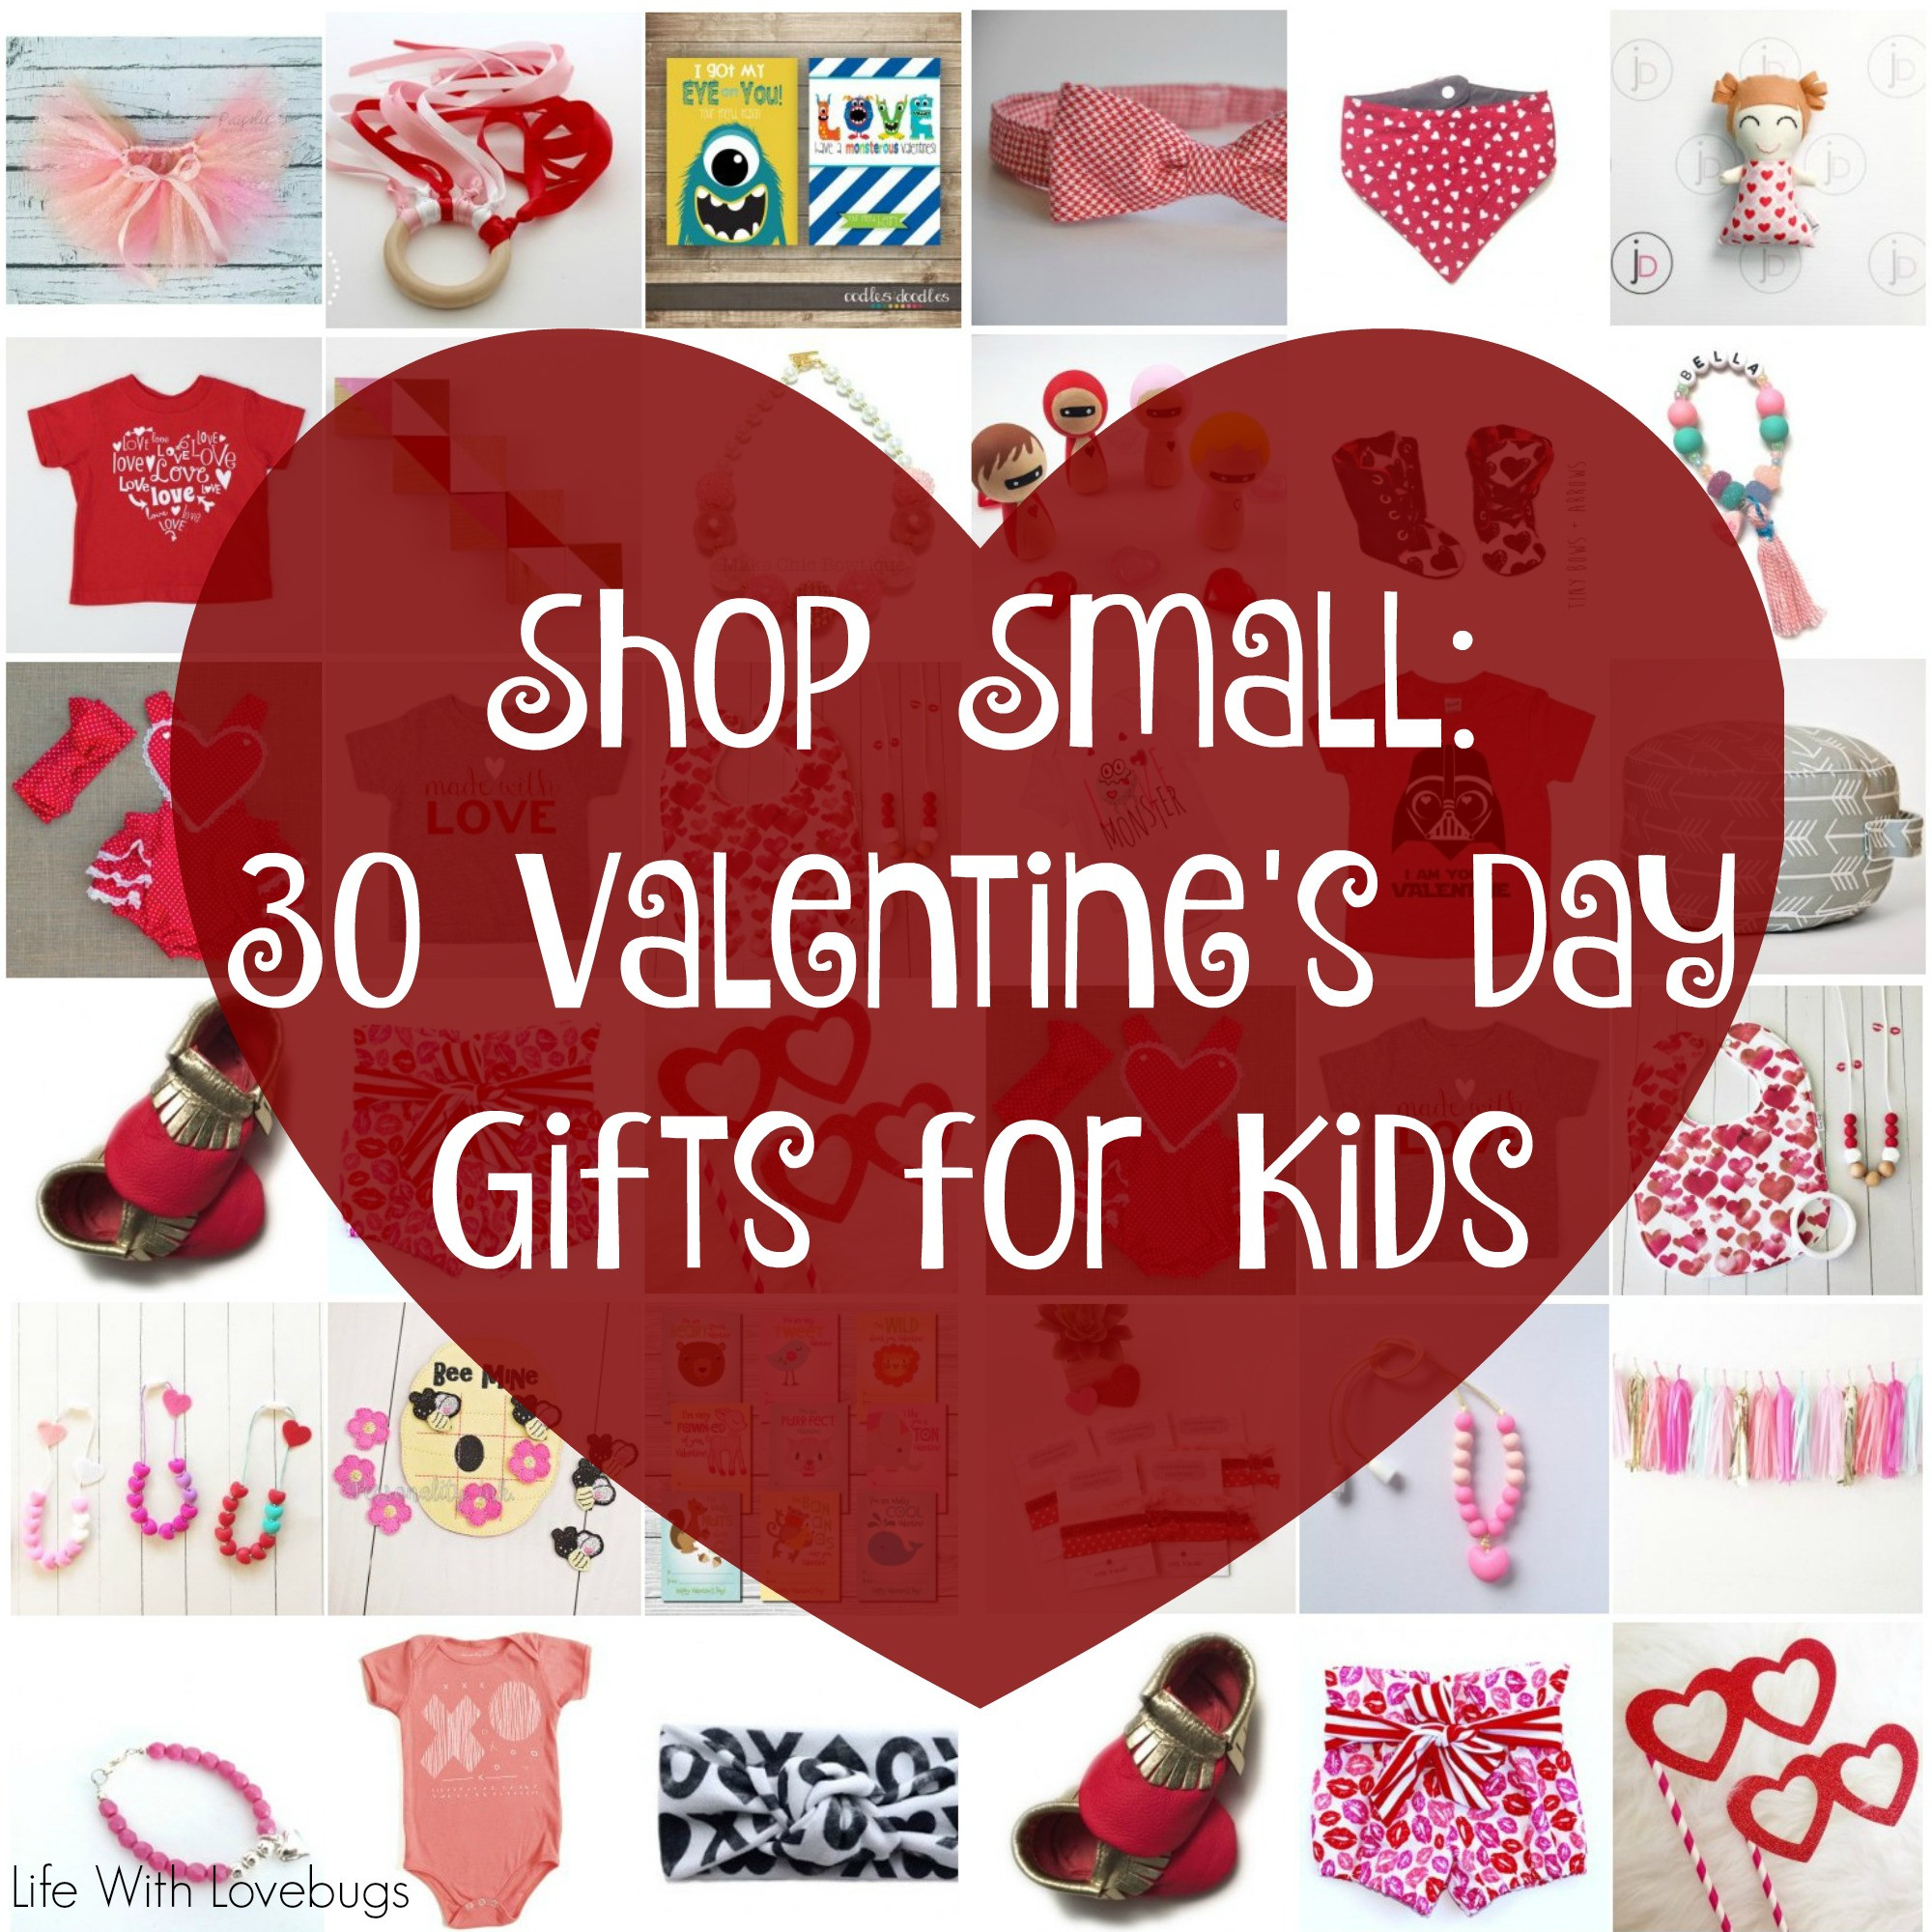 Valentines Gift For Kids
 Shop Small 30 Valentines Day Gifts for Kids Life With